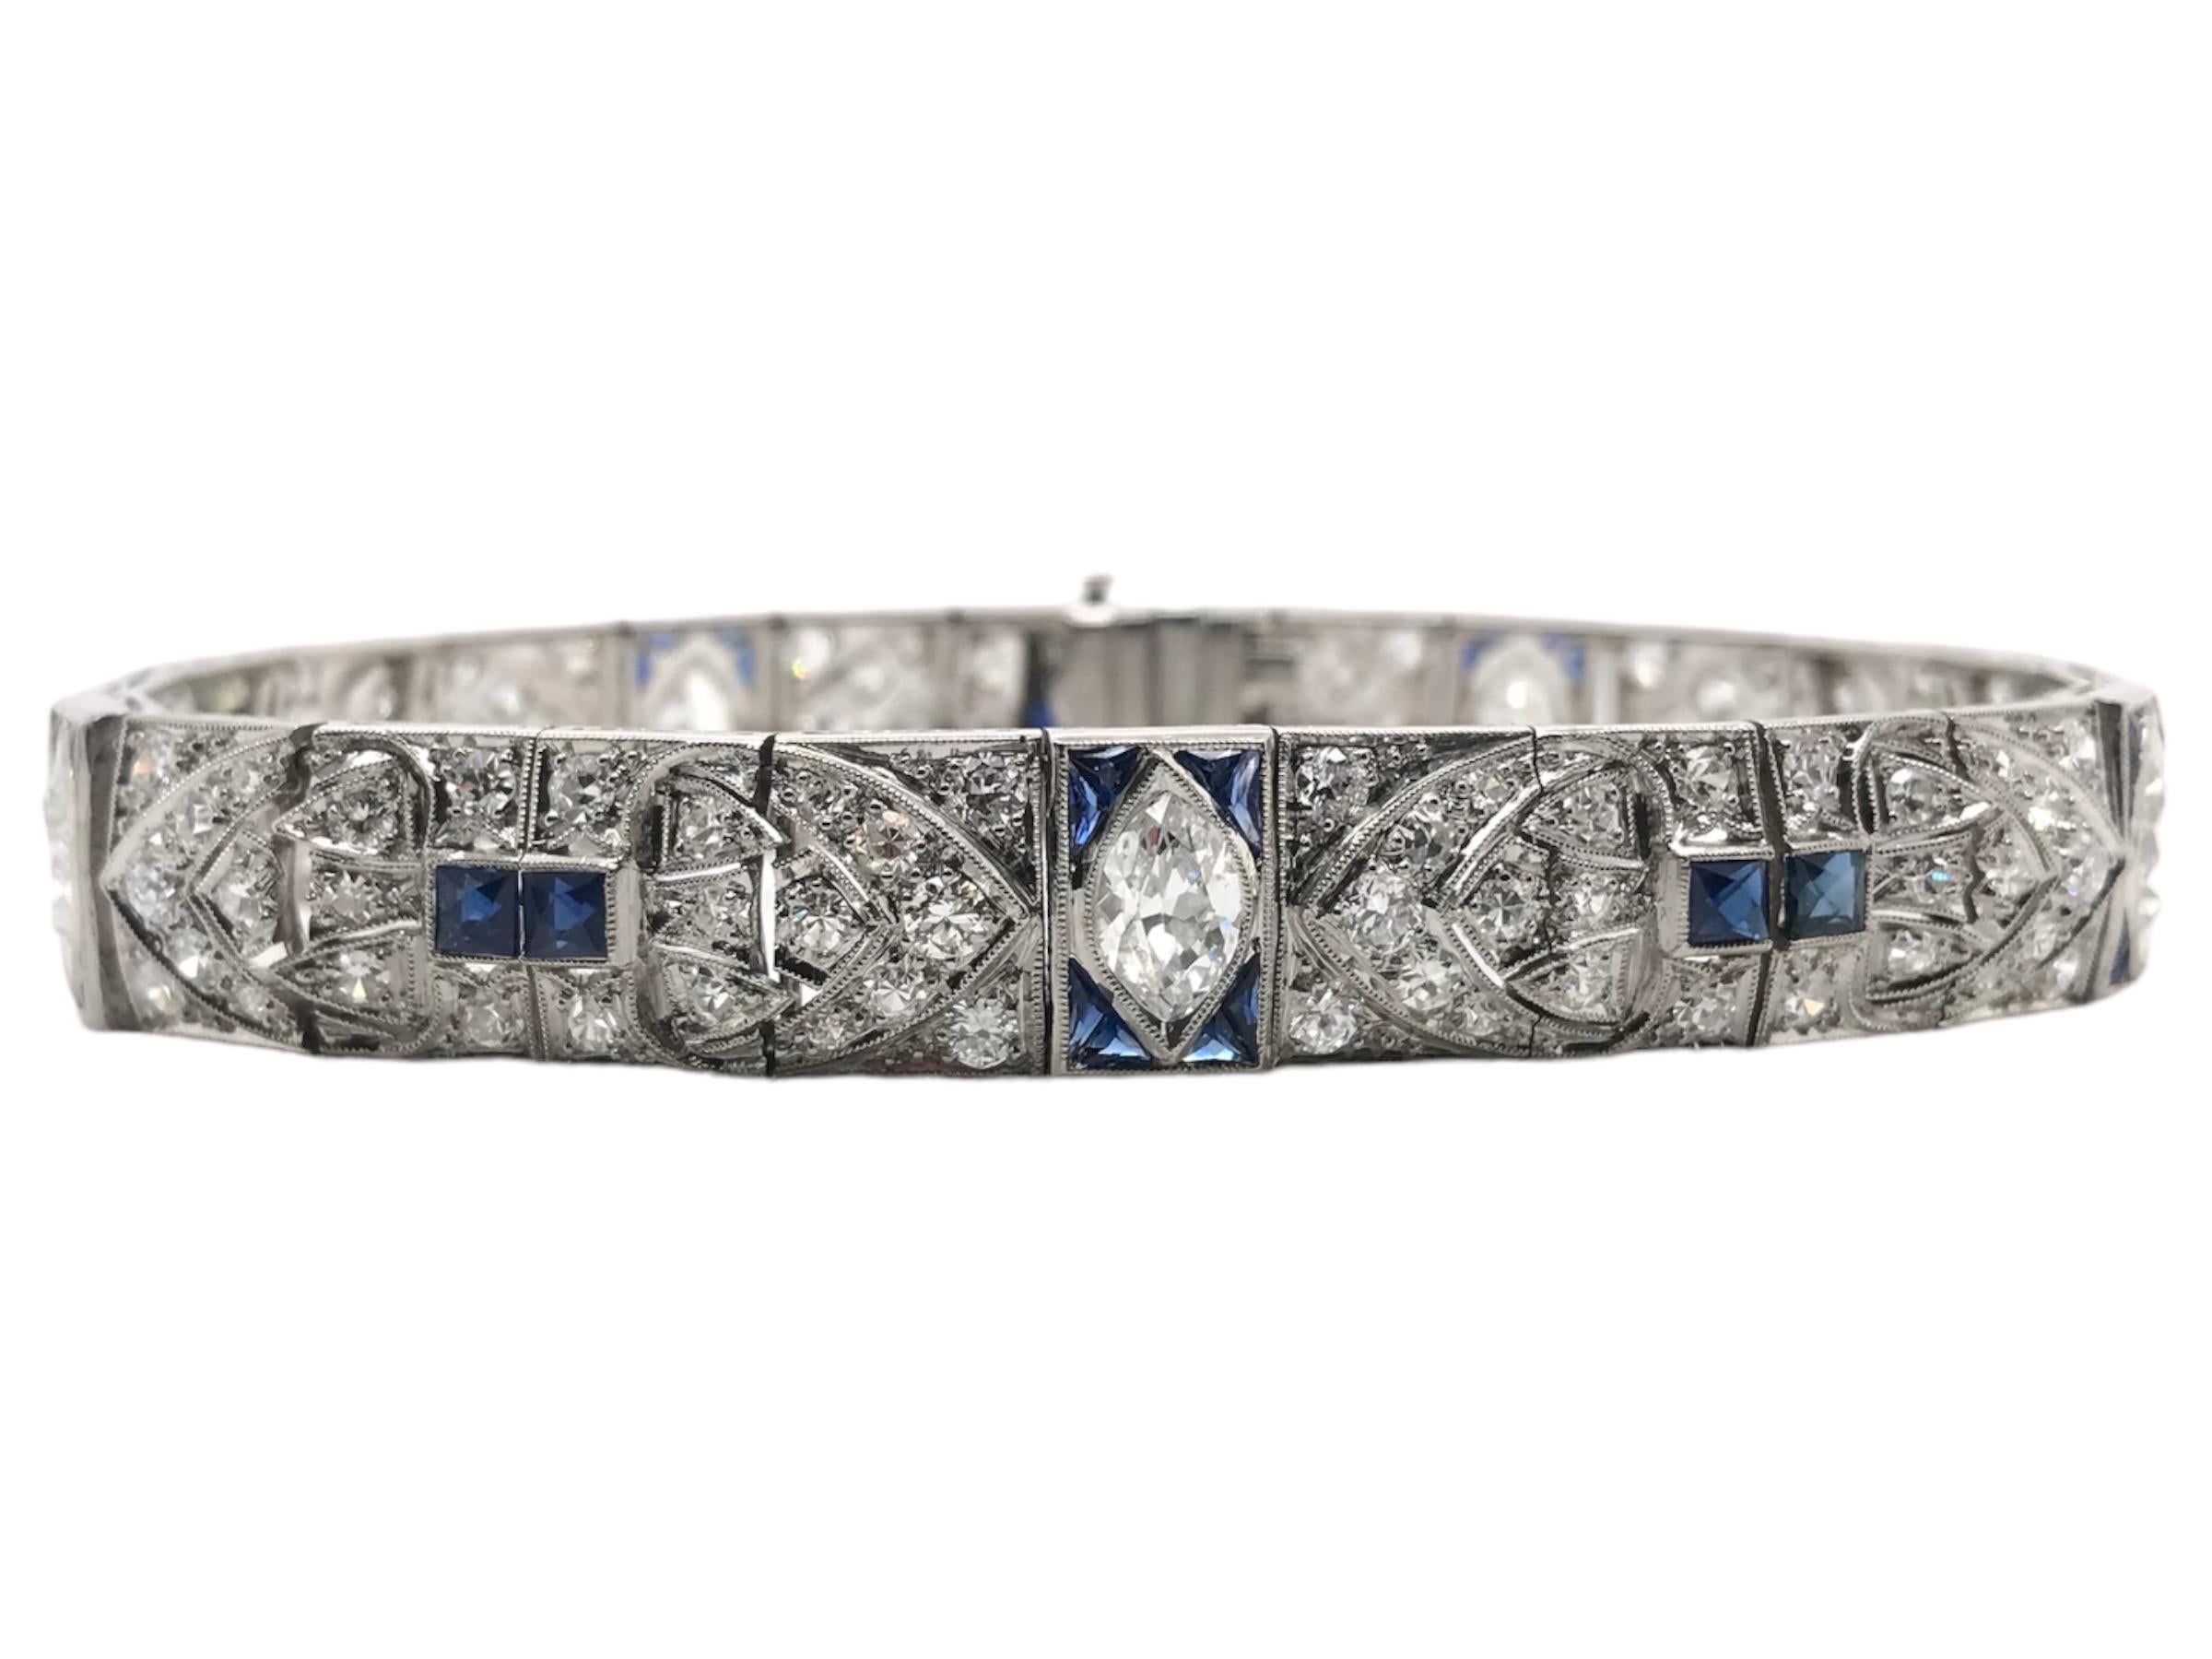 Absolutely Stunning!!
This lovely Art Deco, 1920 - 1940, Bracelet is stunning!! 
Completely detailed with multiple cuts of diamonds & sapphires.
Bracelet Length: 7 Inches
Weight: 28.9 Grams

Diamond Details:
5 - Old Marquise Cut Diamonds; FG Color;